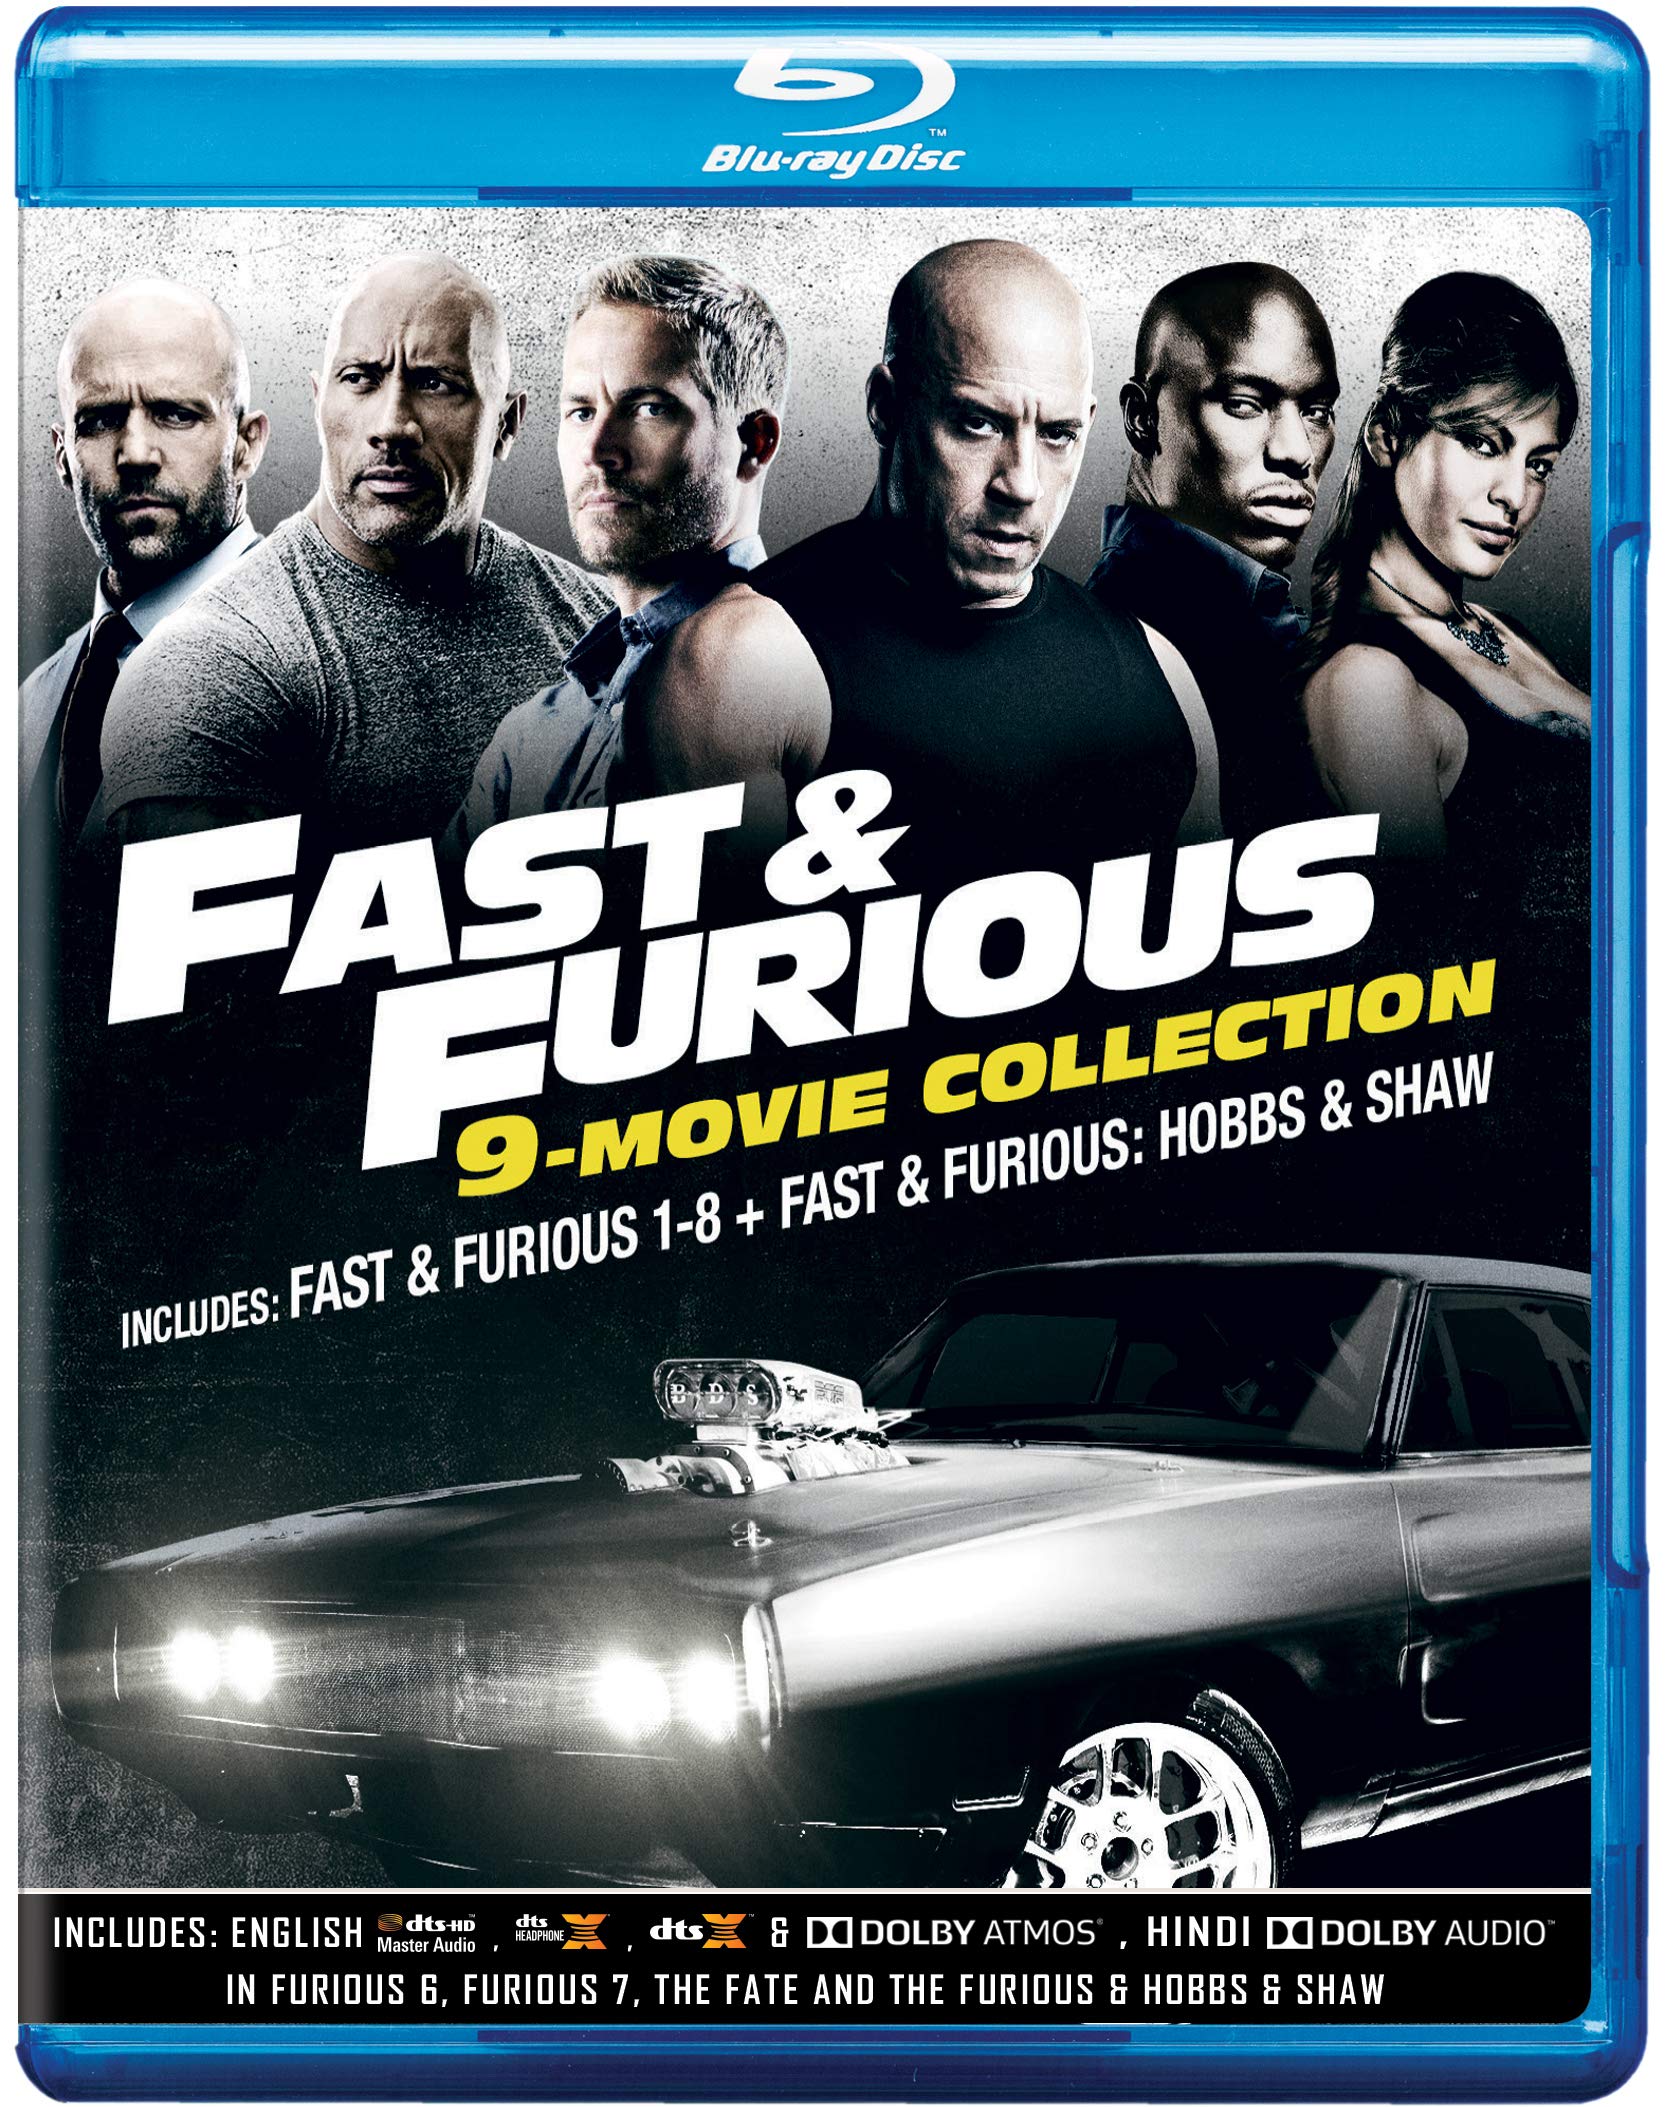 fast-furious-8-movies-collection-hobbs-shaw-9-disc-box-set-mov